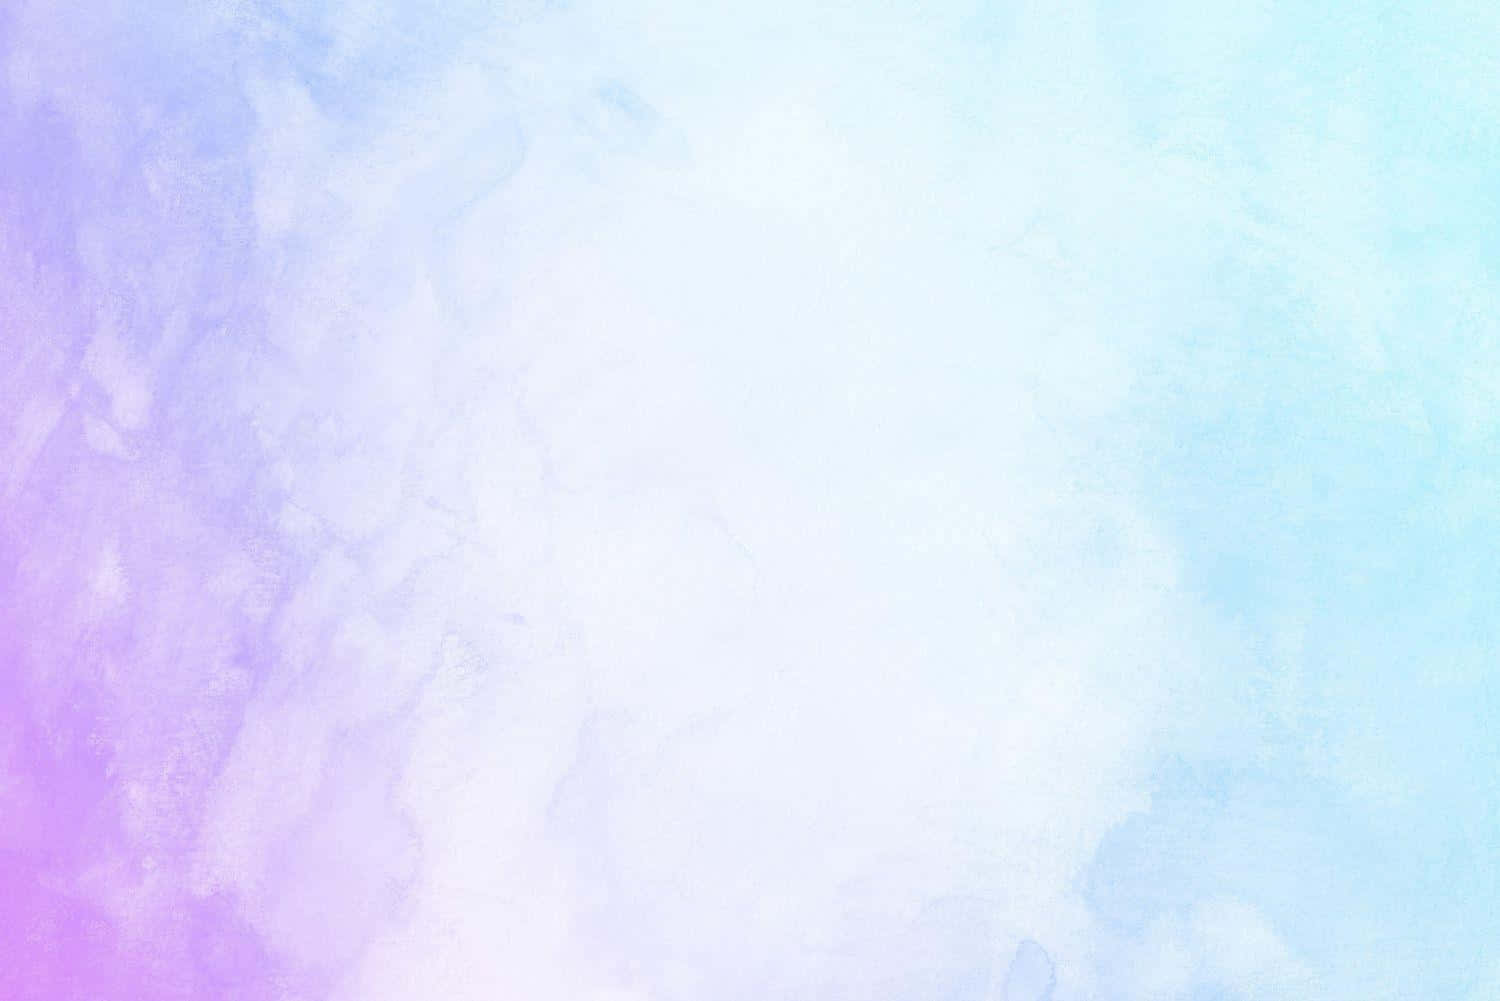 “Inspiring swirls of pastel colors come together to create a beautiful watercolor background.”